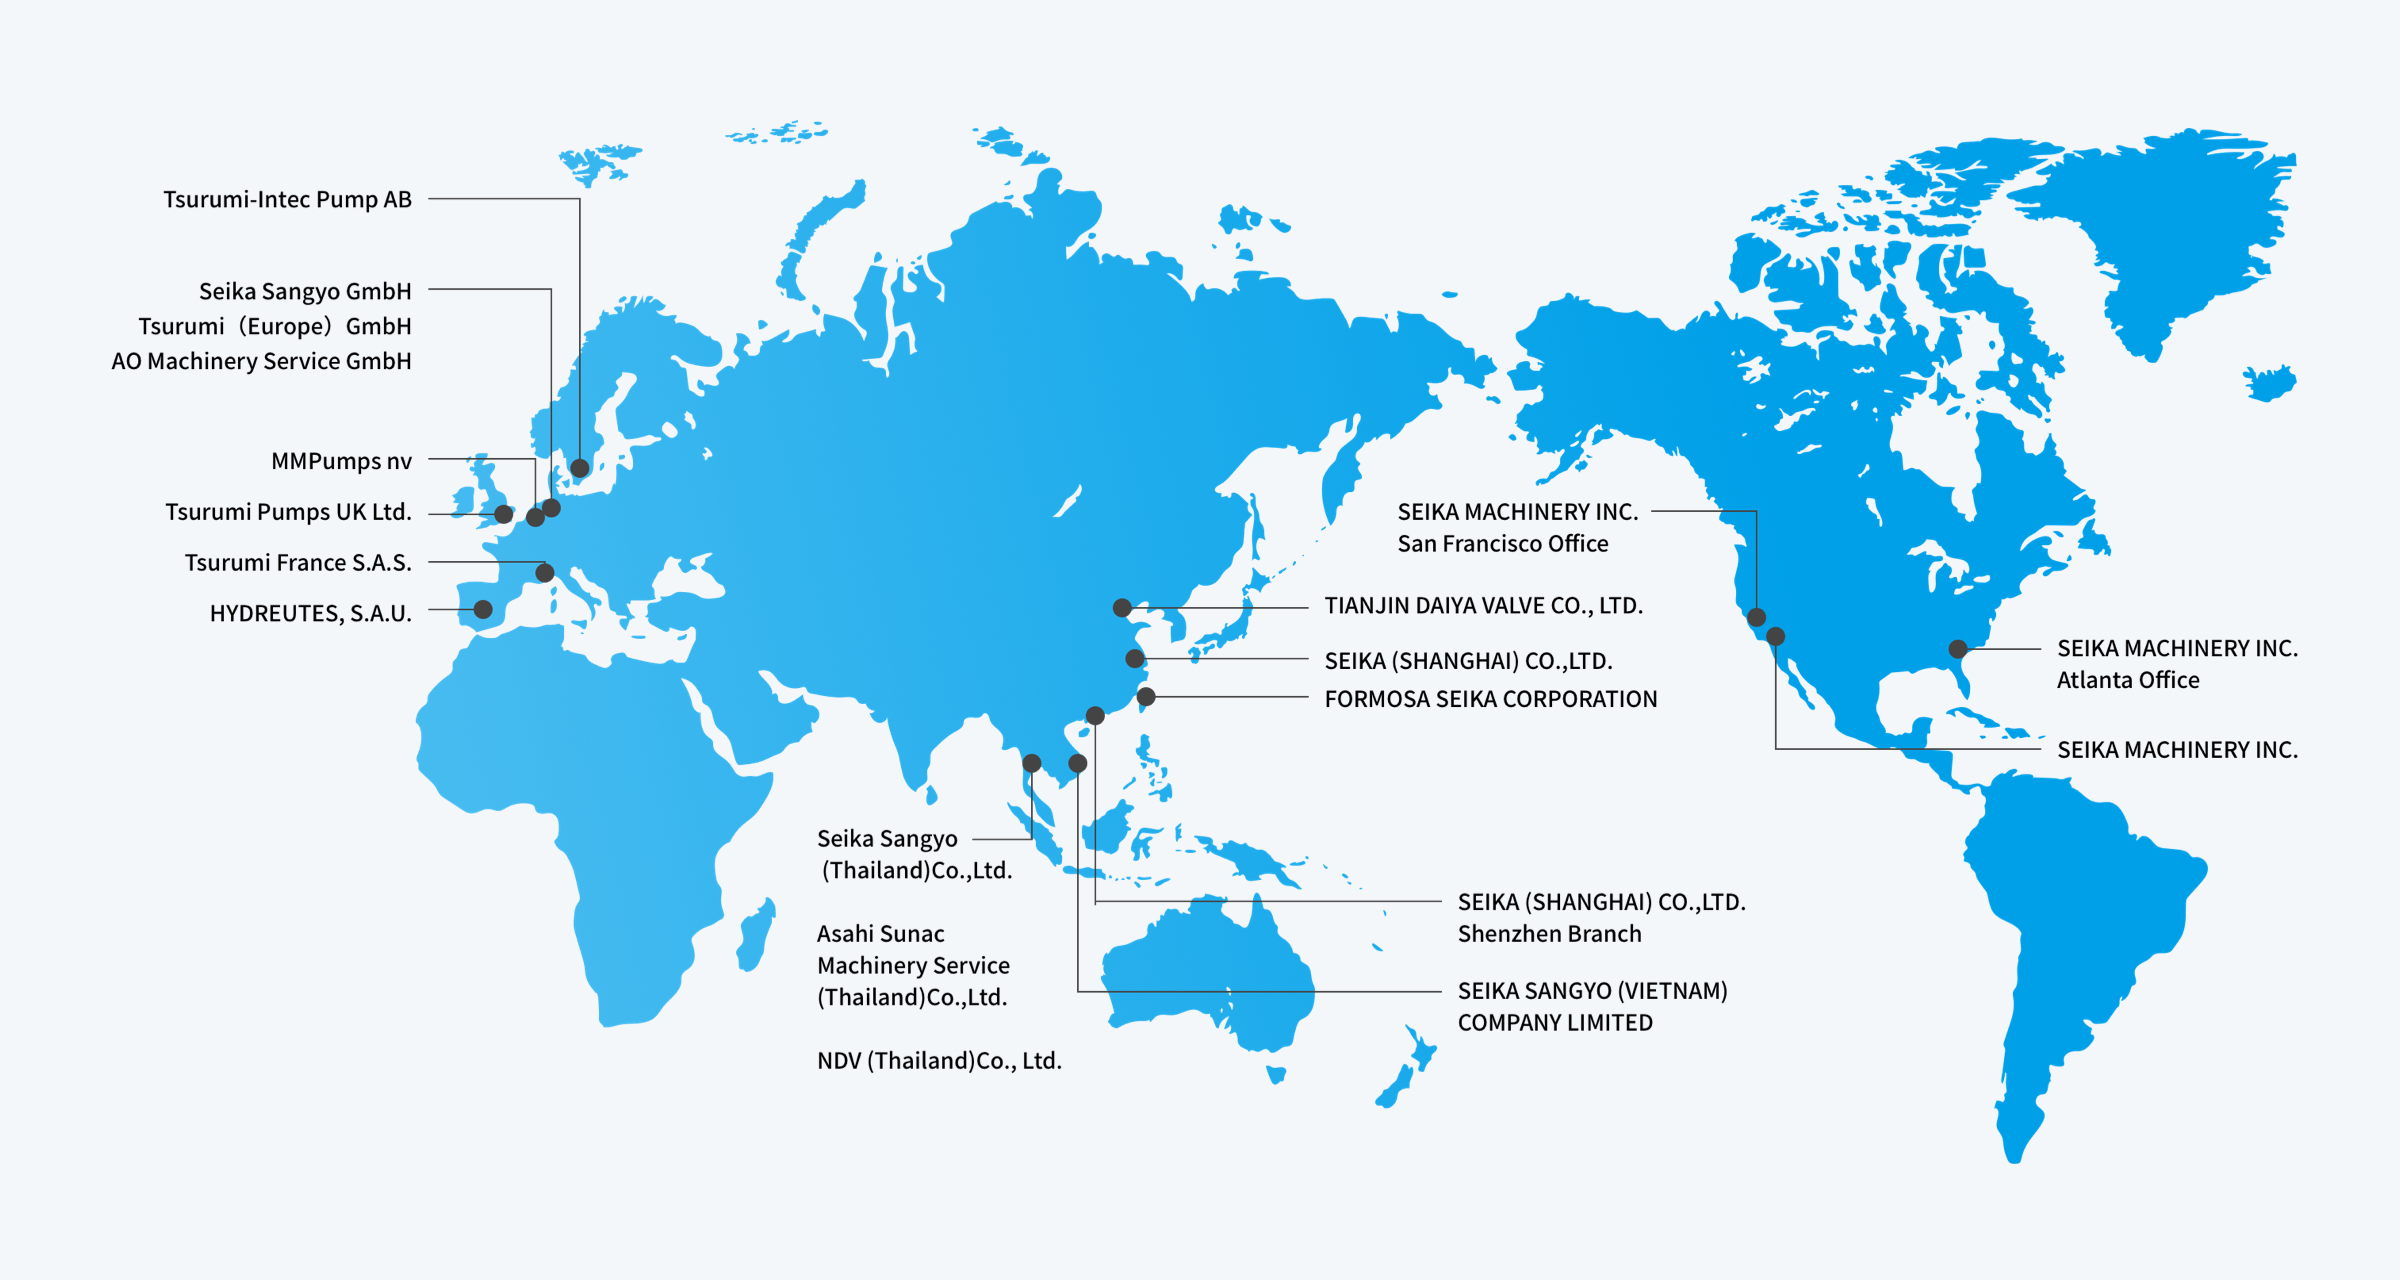 Locations of Consolidated Subsidiaries and Affiliates Worldwide